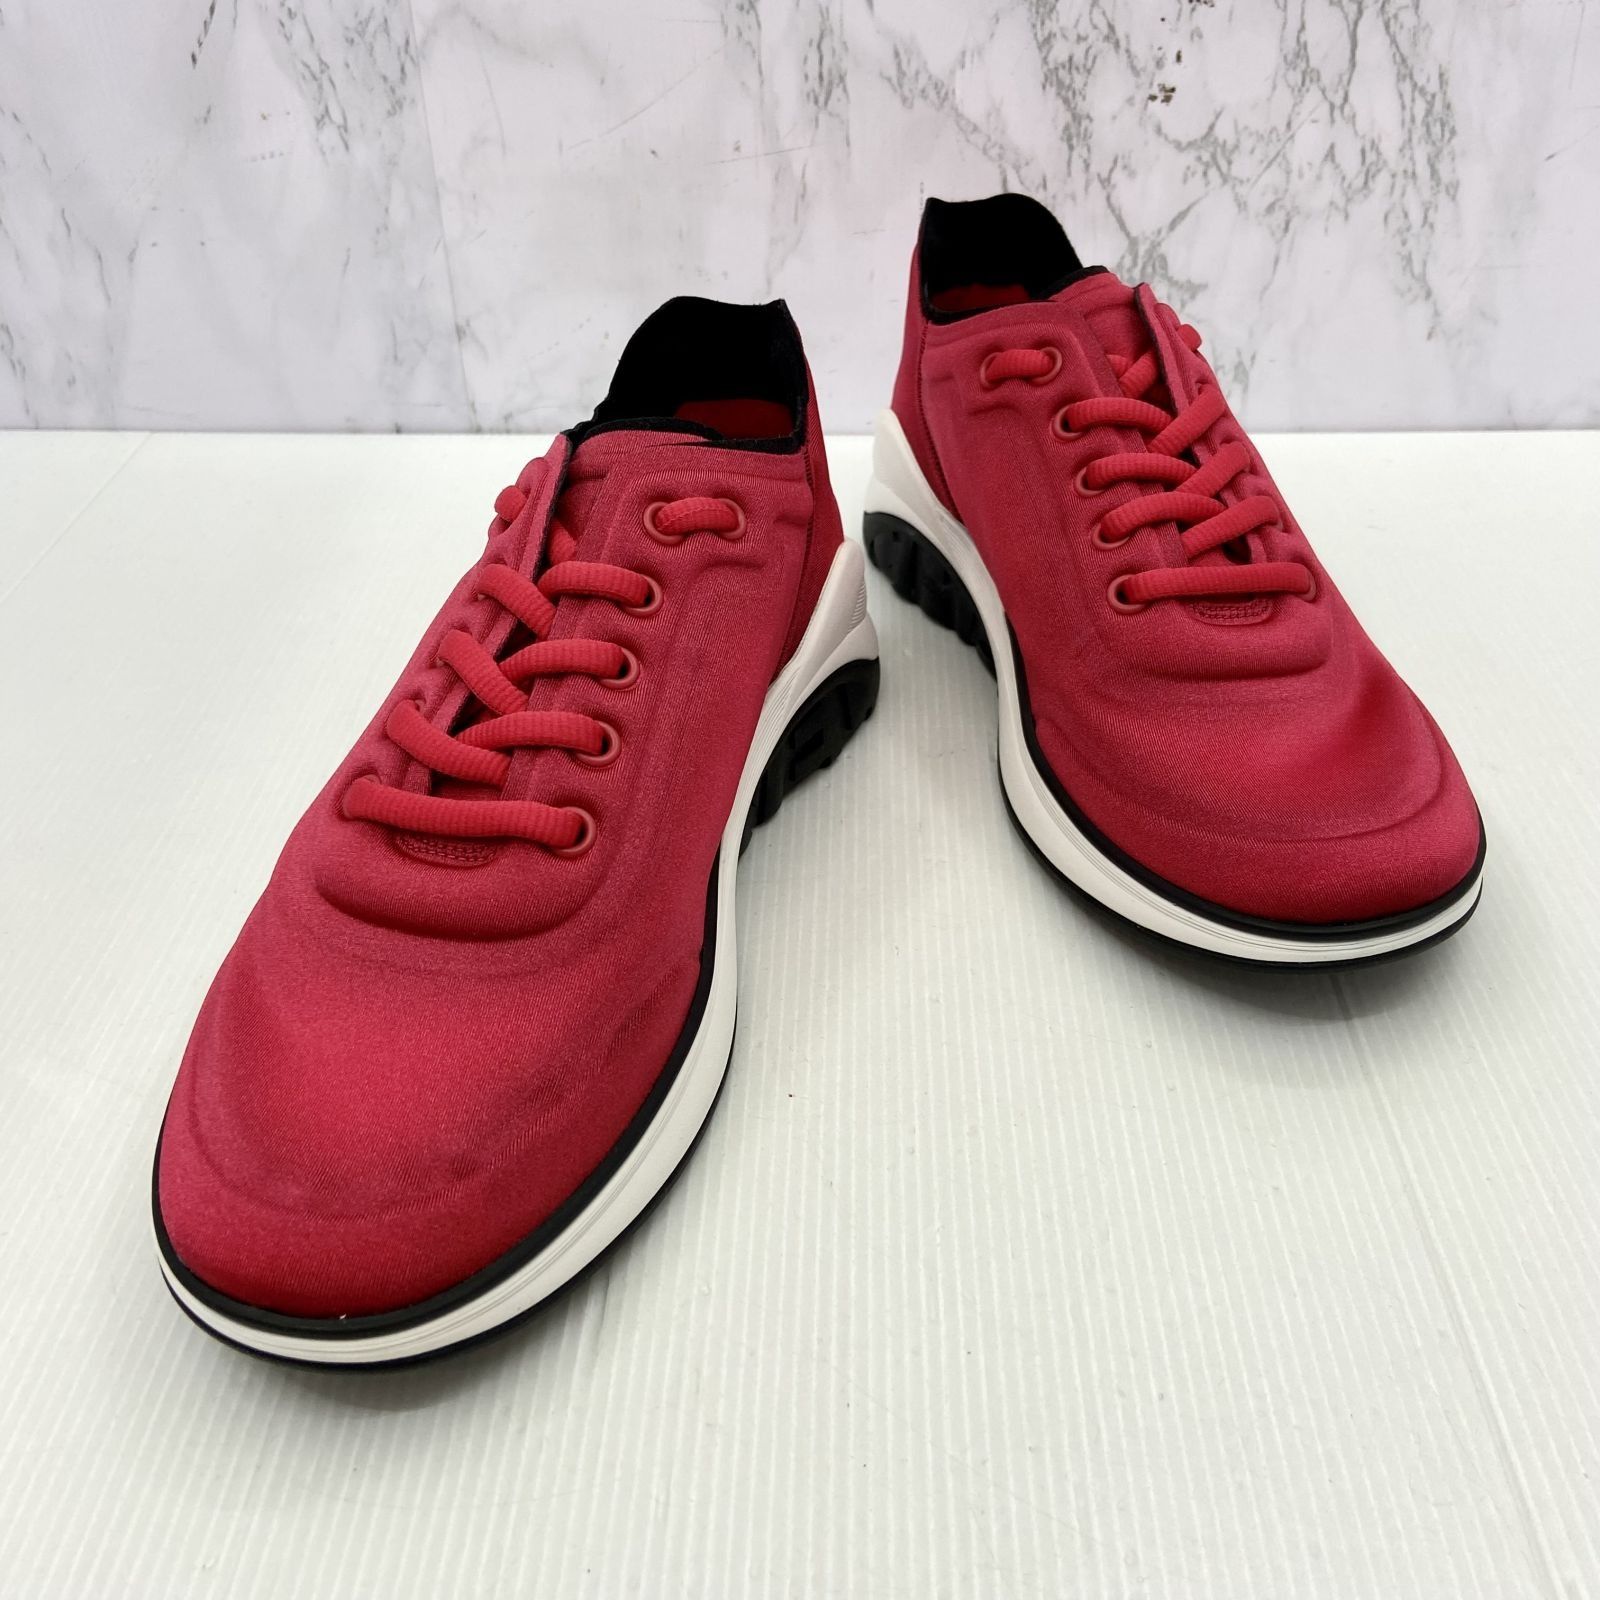 *DISCOUNTED* CHANEL G34763 RED SPORTS SNEAKERS 227030849 AL